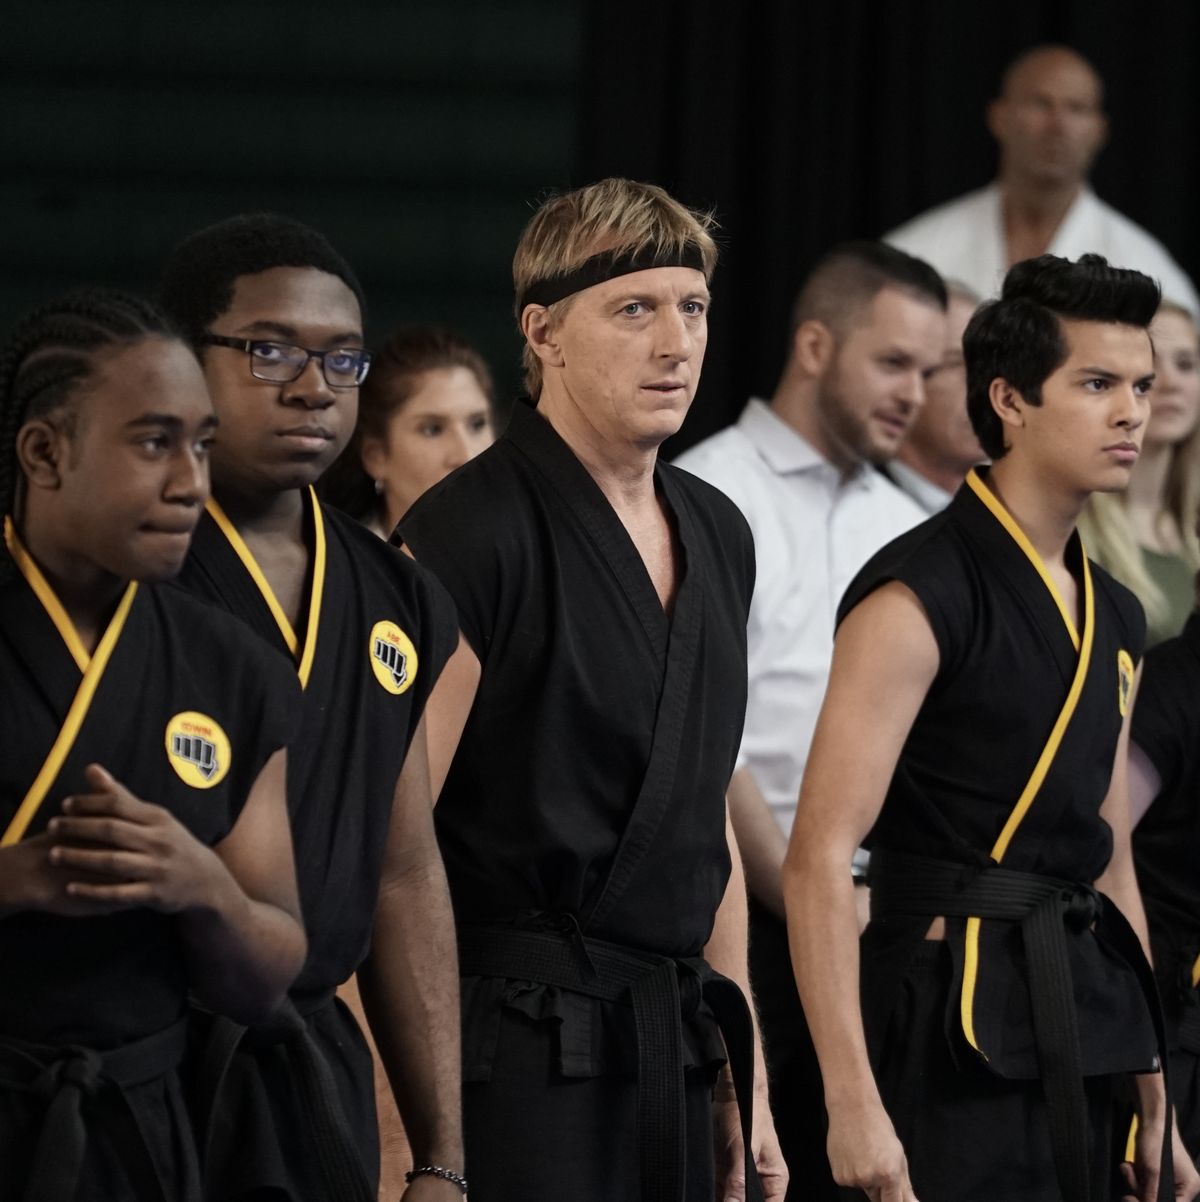 Cobra Kai boss on how the show continues to honour The Karate Kid